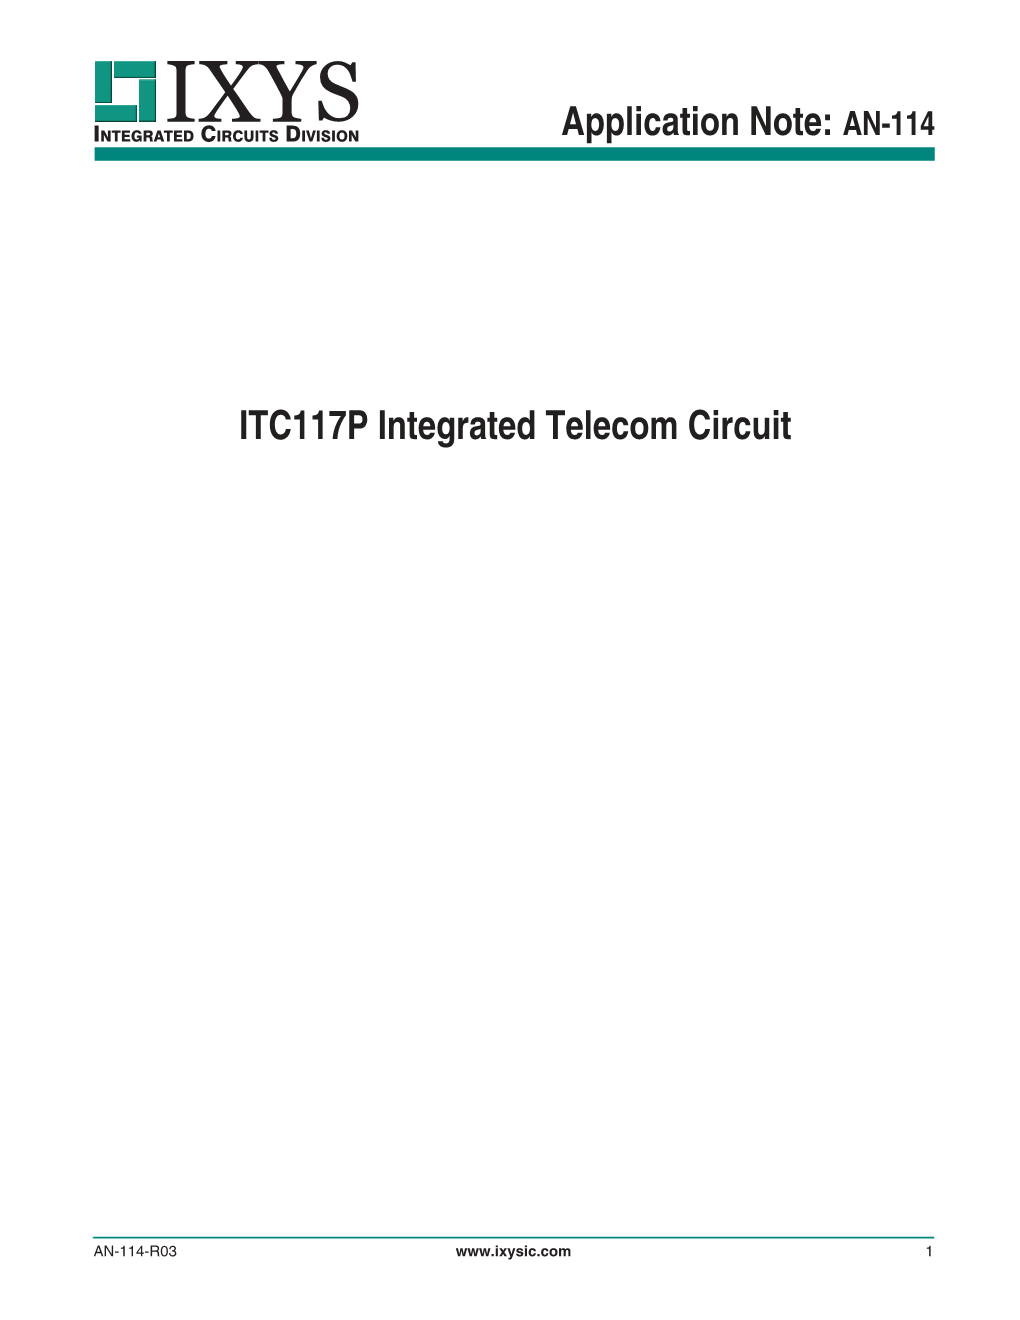 Application Note: AN-114 ITC117P Integrated Telecom Circuit